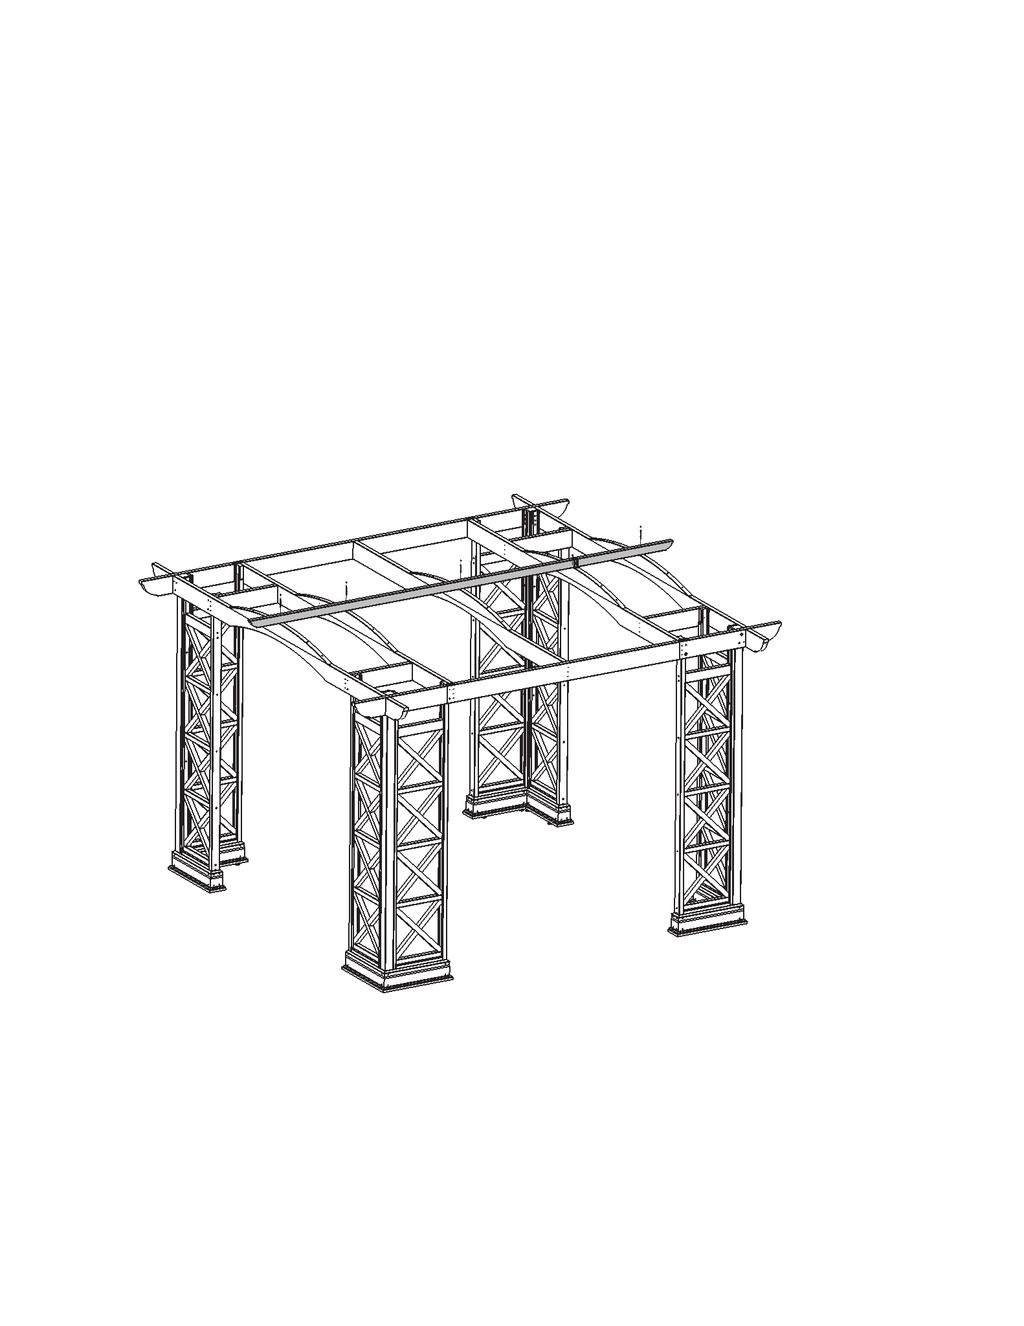 Step 13: Attach Trellis End Assemblies Part 1 A: Measure 59-1/4 from the inside of each (301) Beam 81-1/2 and place one Trellis End Assembly on the Arch Beam Offsets Arch Beam Centre and Arch Beam